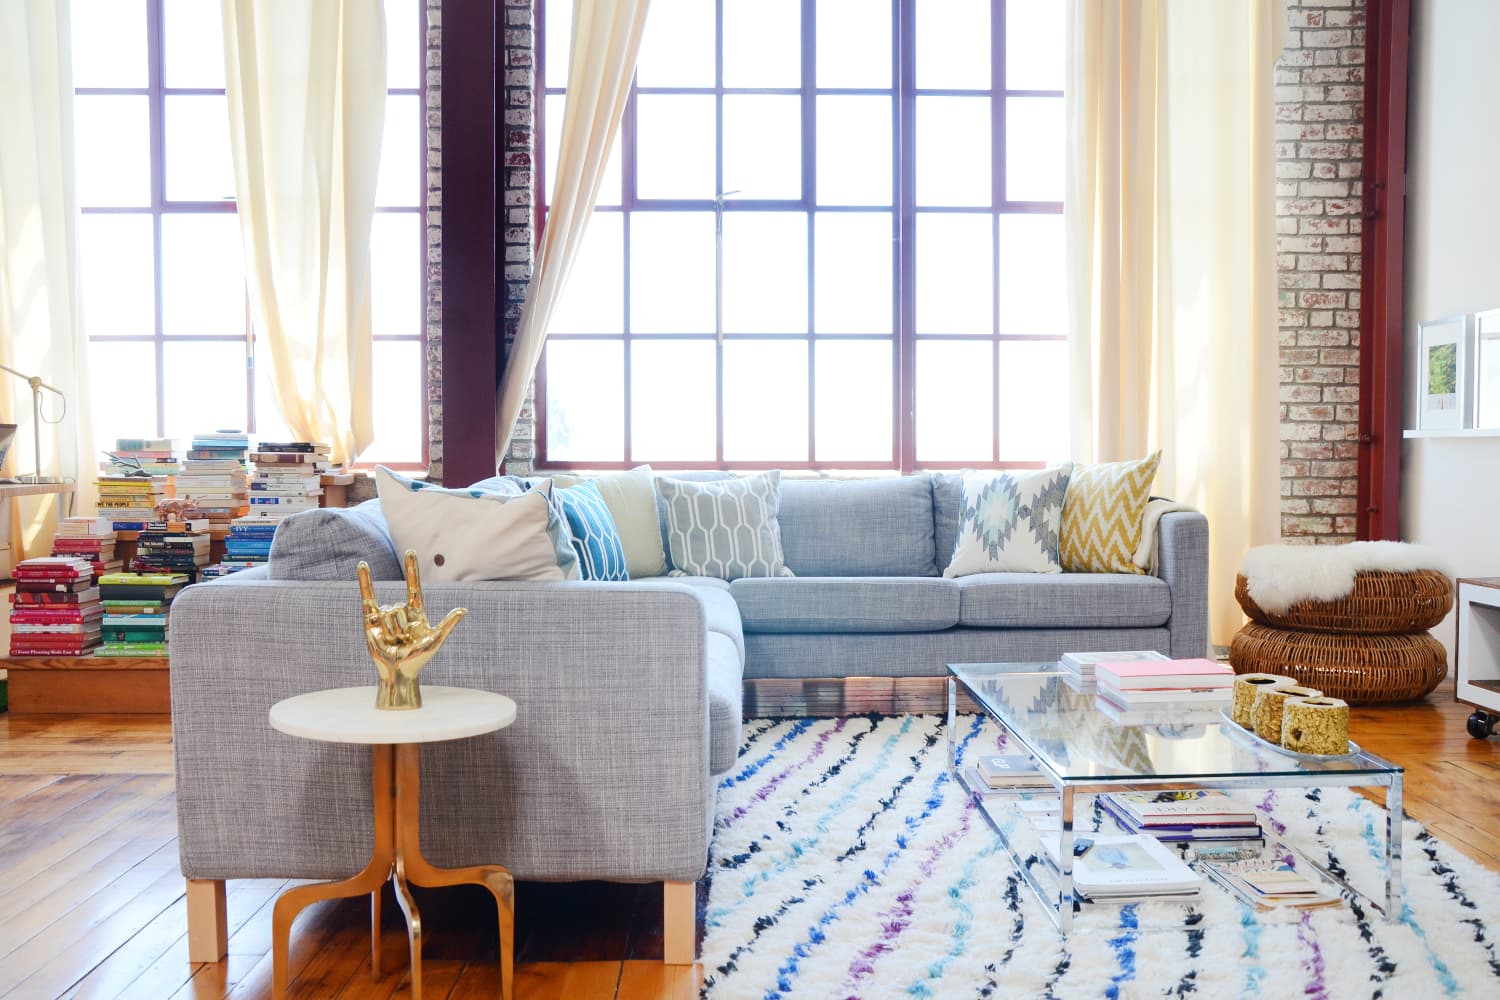 Runner Rugs: 12 Stylish, Cozy Options For Your Home